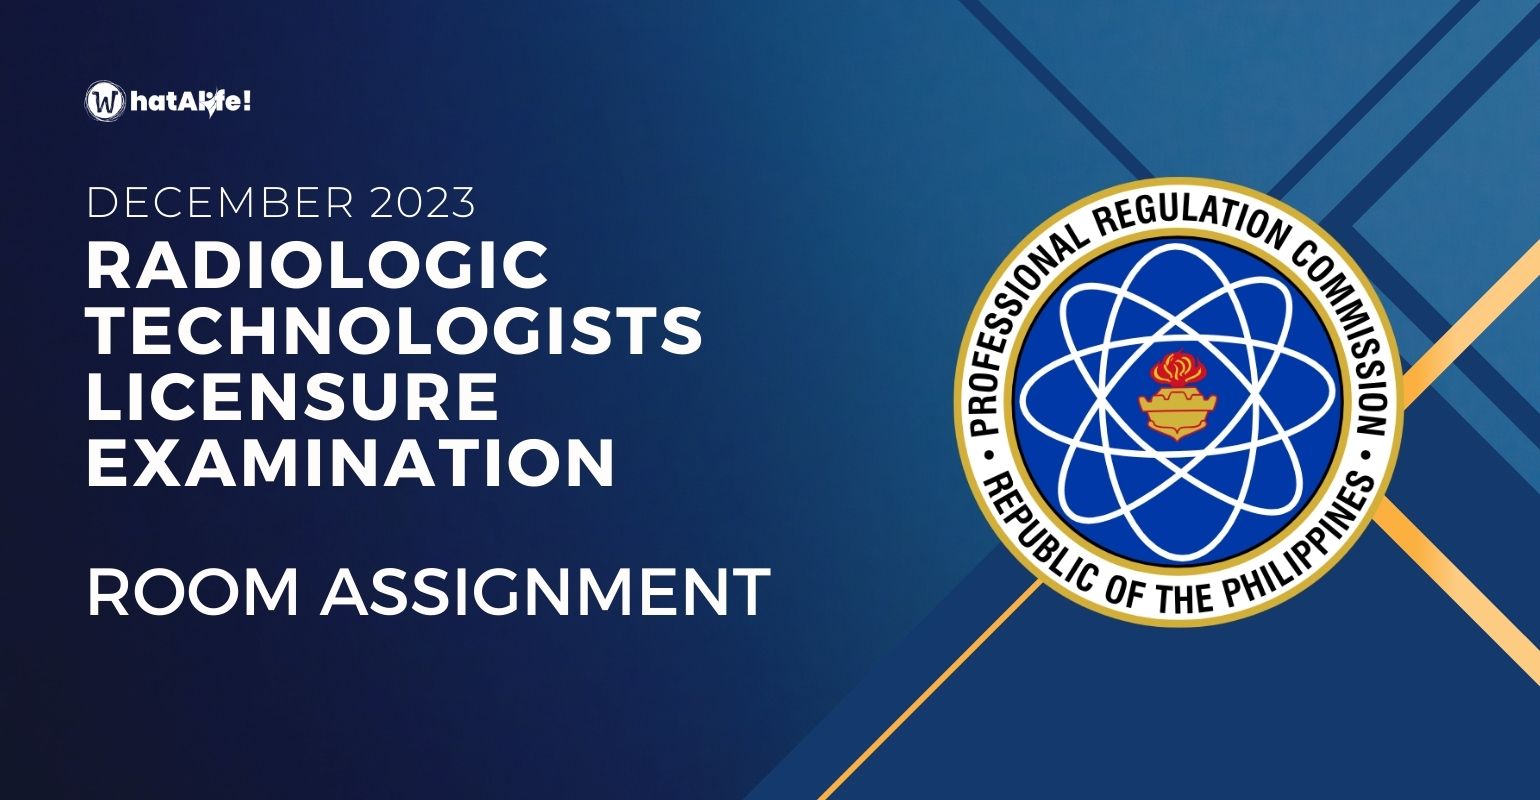 room assignment december 2023 radiologic technologists licensure exam